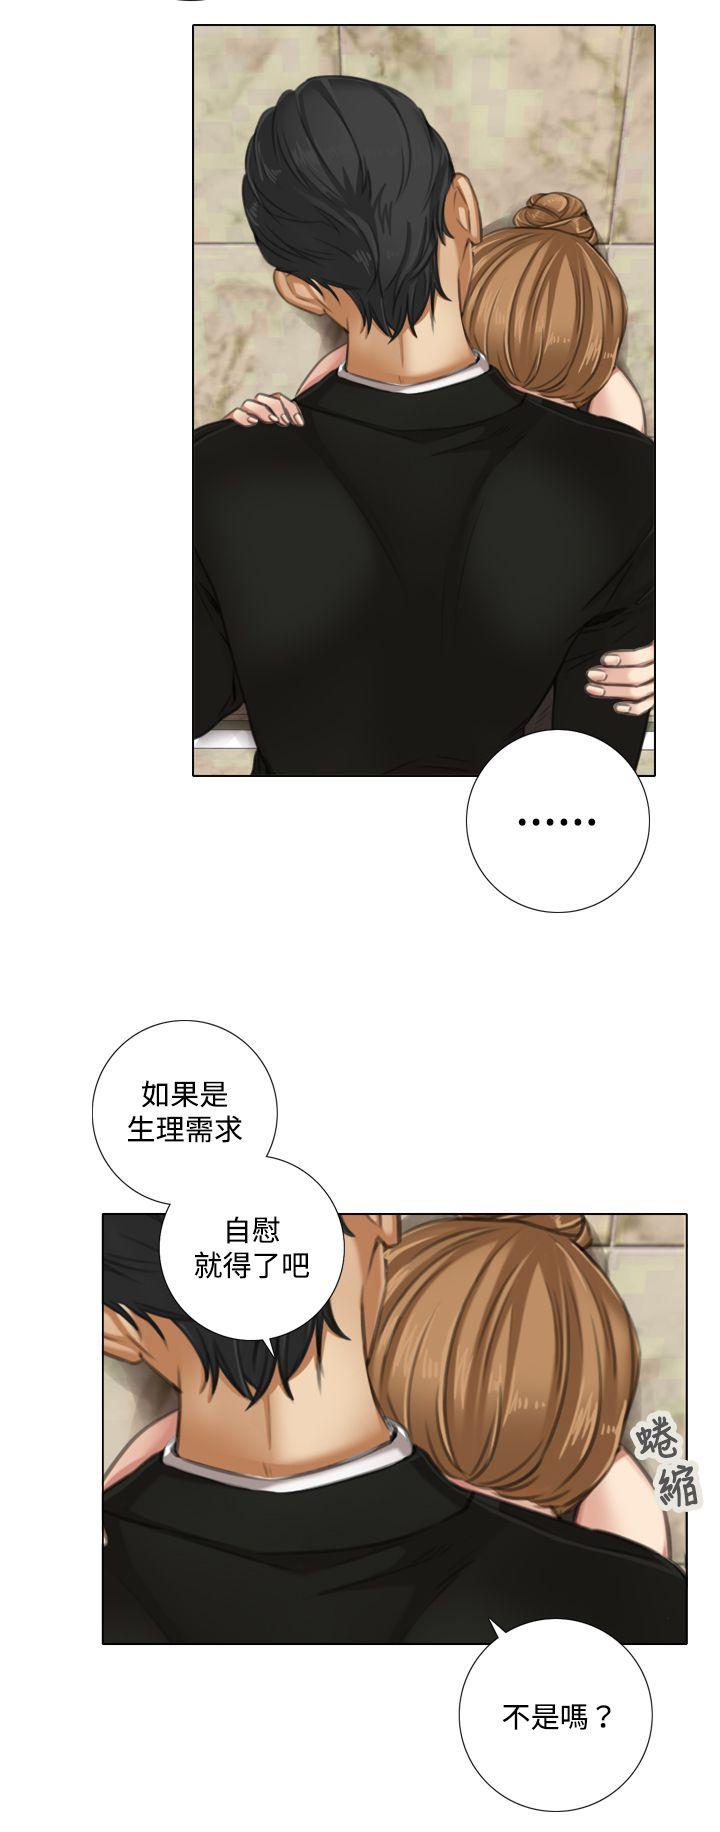 《TOUCH ME》漫画 第9话